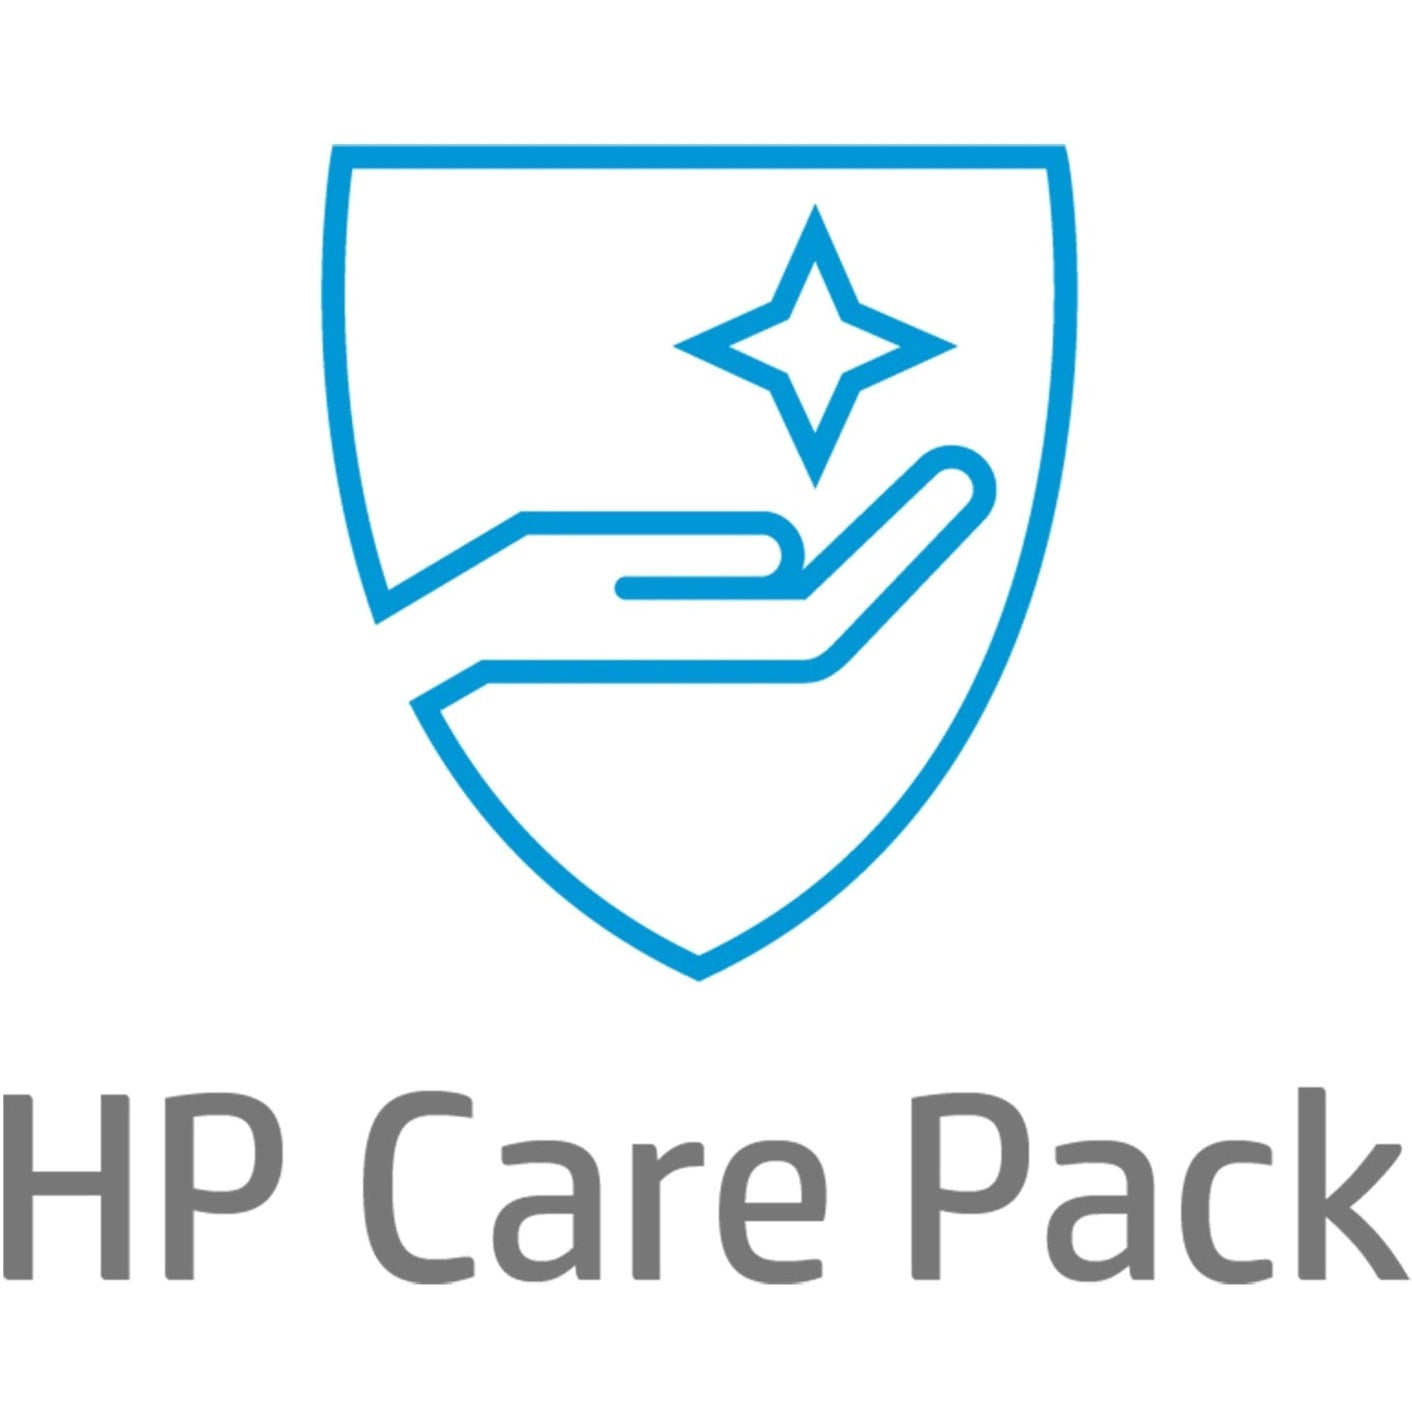 HP Care Pack - Extended Service - 5 Year - Service (U9CQ2E)